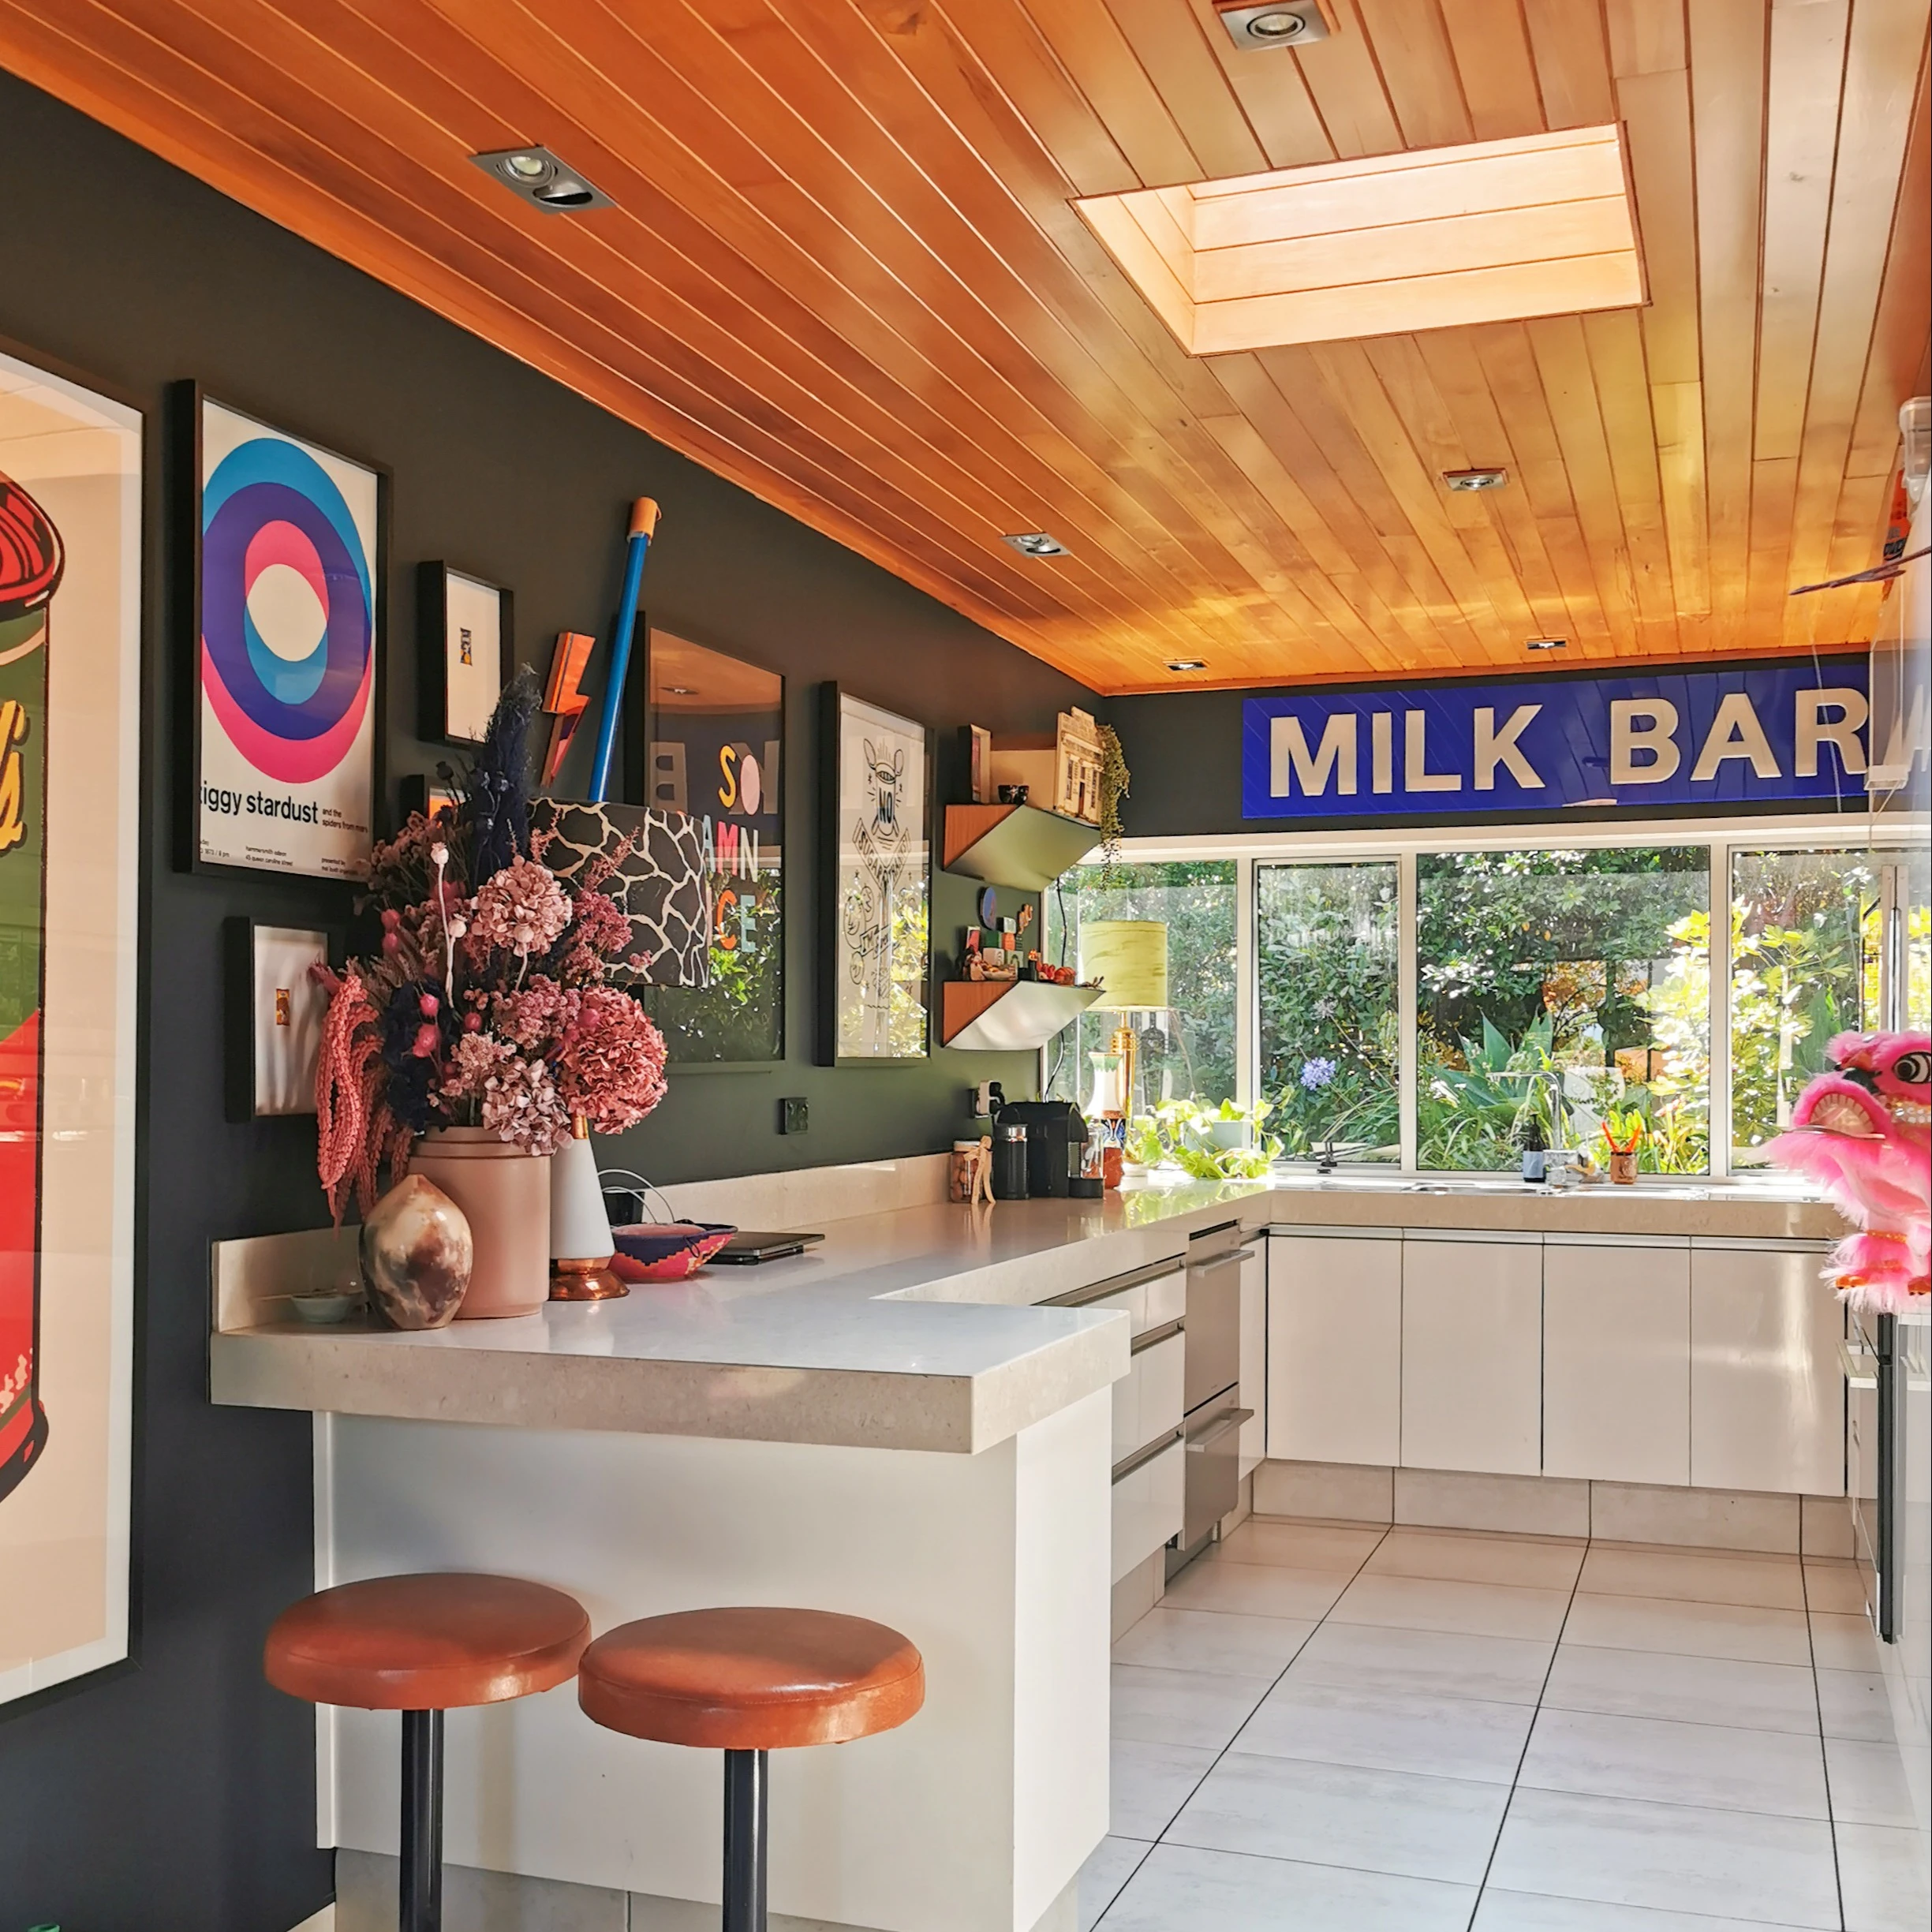 Evie Kemp's kitchen has white tiles on the floor with white cabinets and a white benchtop. Her wall is dark green with lots of colourful artwork on it. The ceiling is wooden and above the bench sits a sign that looks like a street sign that says 'milk bar'